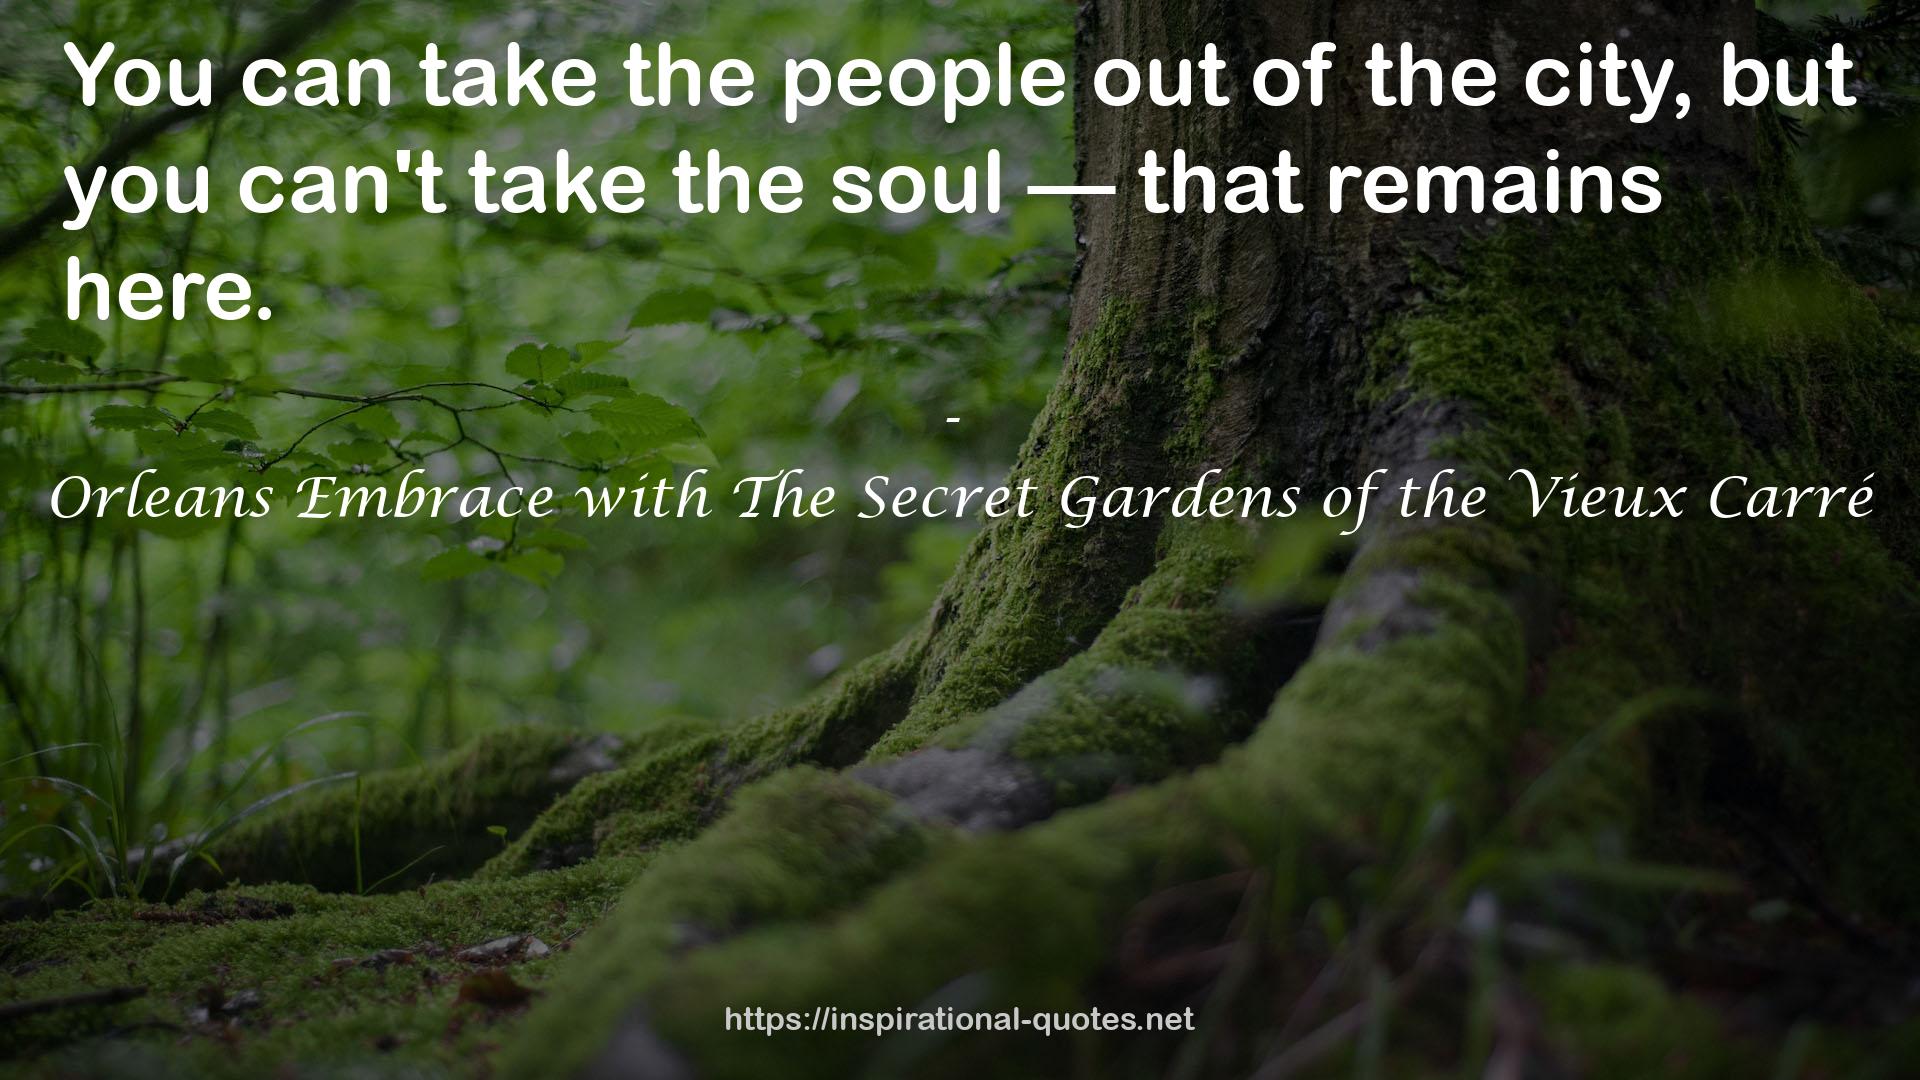 Orleans Embrace with The Secret Gardens of the Vieux Carré QUOTES